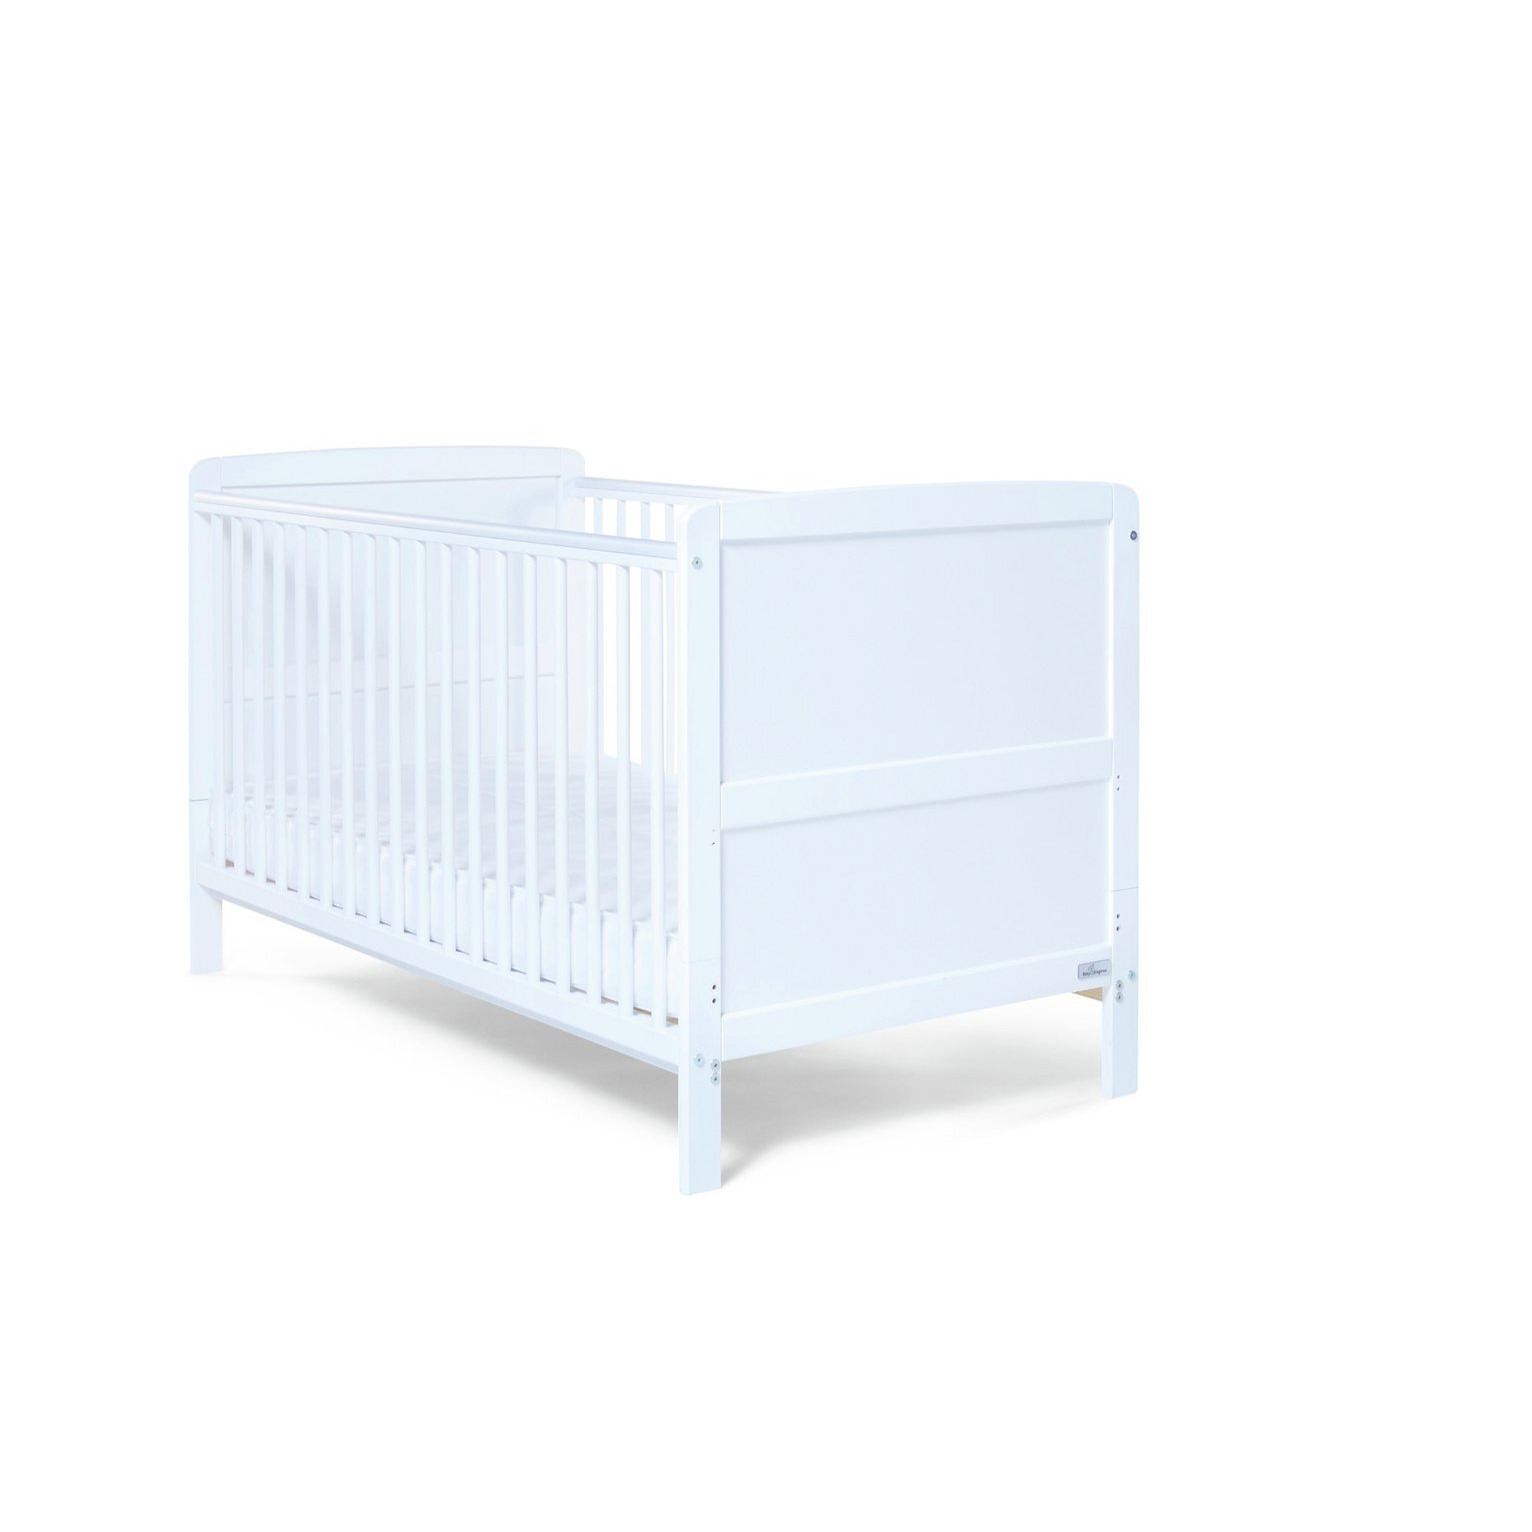 Baby Elegance Travis Baby Cot Bed with Mattress - White - image 1